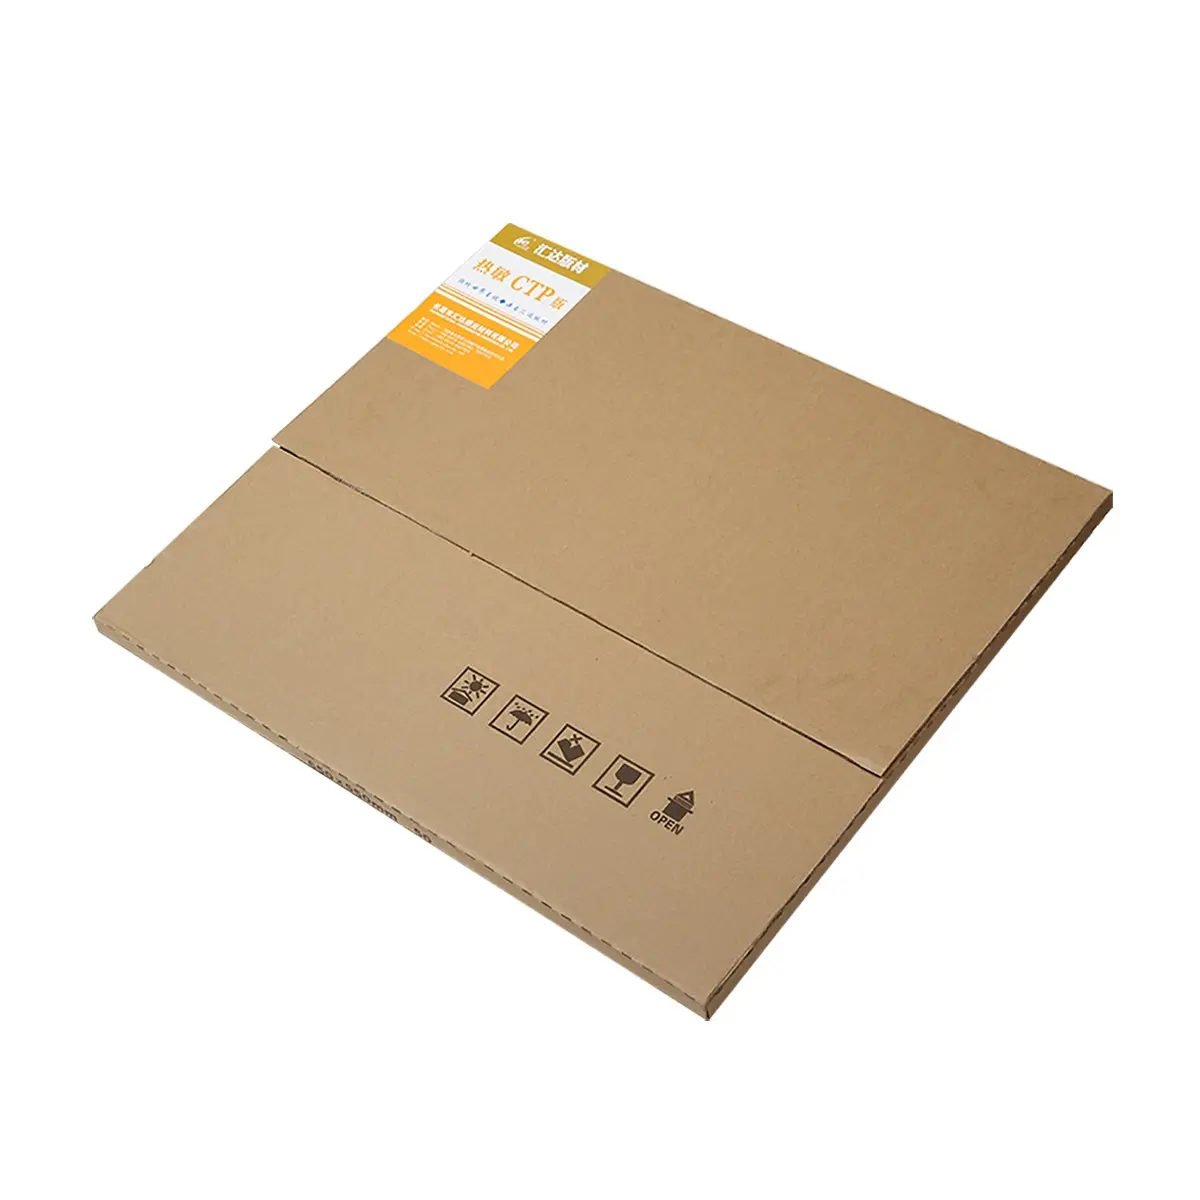 525*459*0.15mm Single Layer Thermal CTP Plate GTO 52 Printing Plate ON SALE